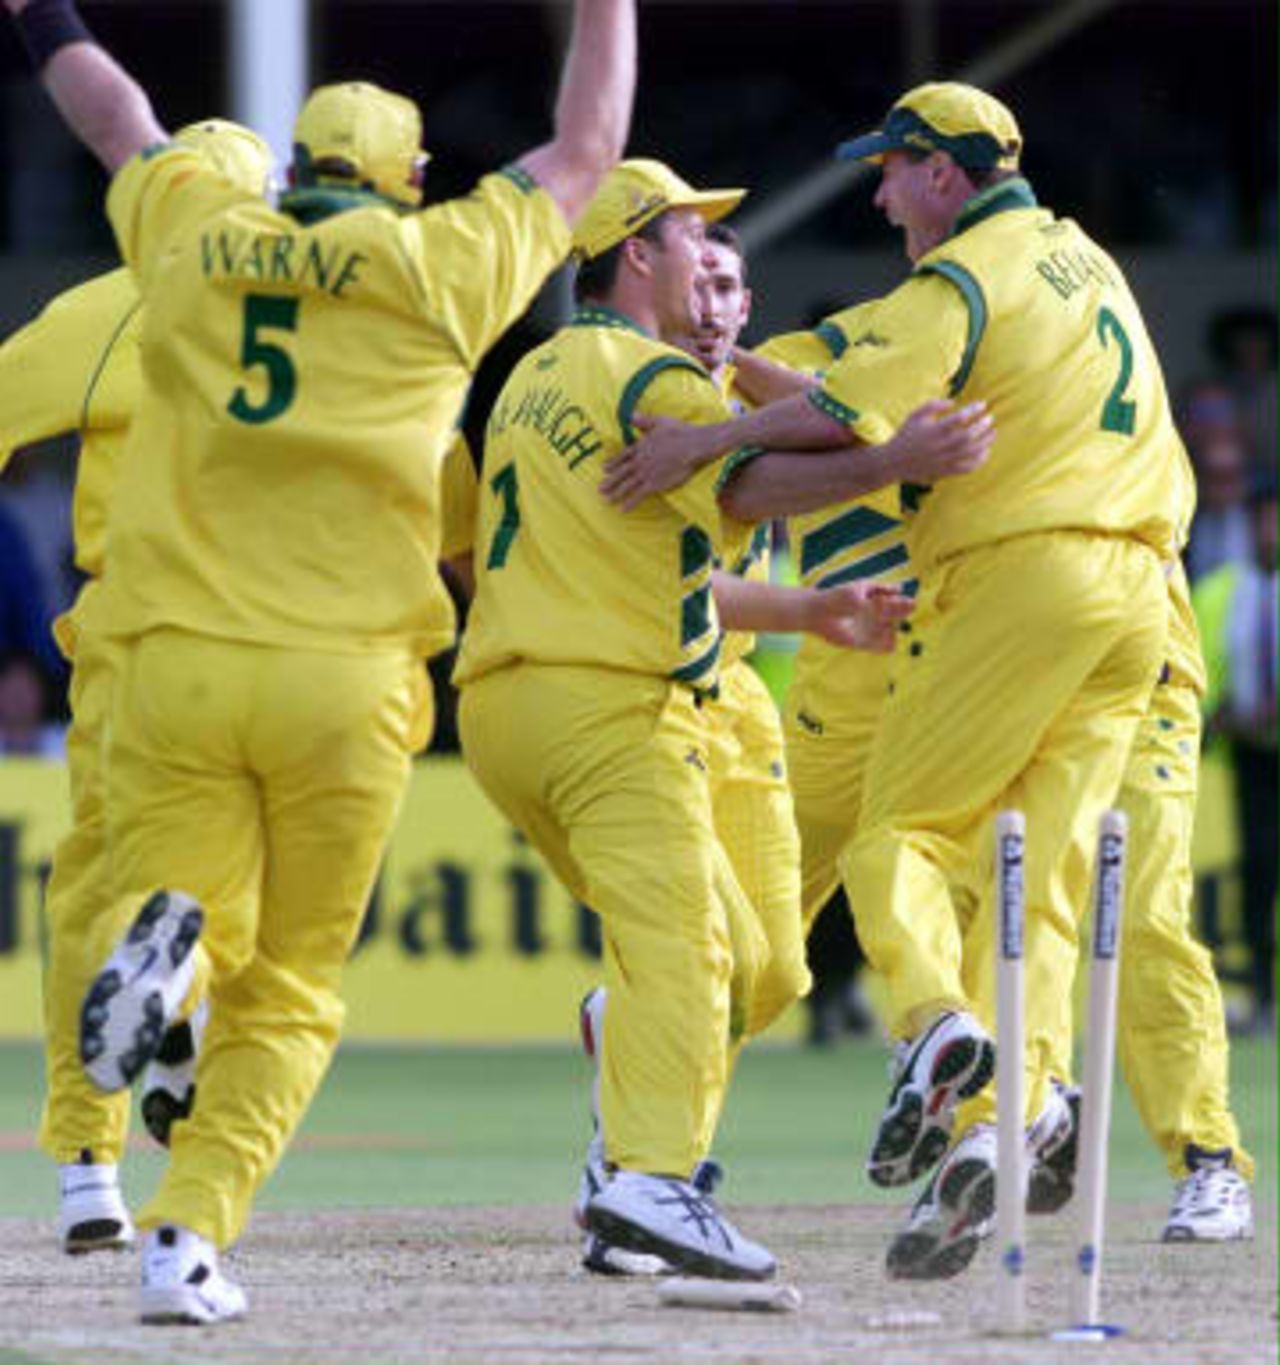 Australia's Shane Warne (Left), Steve Waugh (Right) and Michael Bevan celebrate after they run out Allan Donald for victory over South Africa during their semi-final match in the Cricket World Cup at Edgbaston, Birmingham, 17 June 1999.